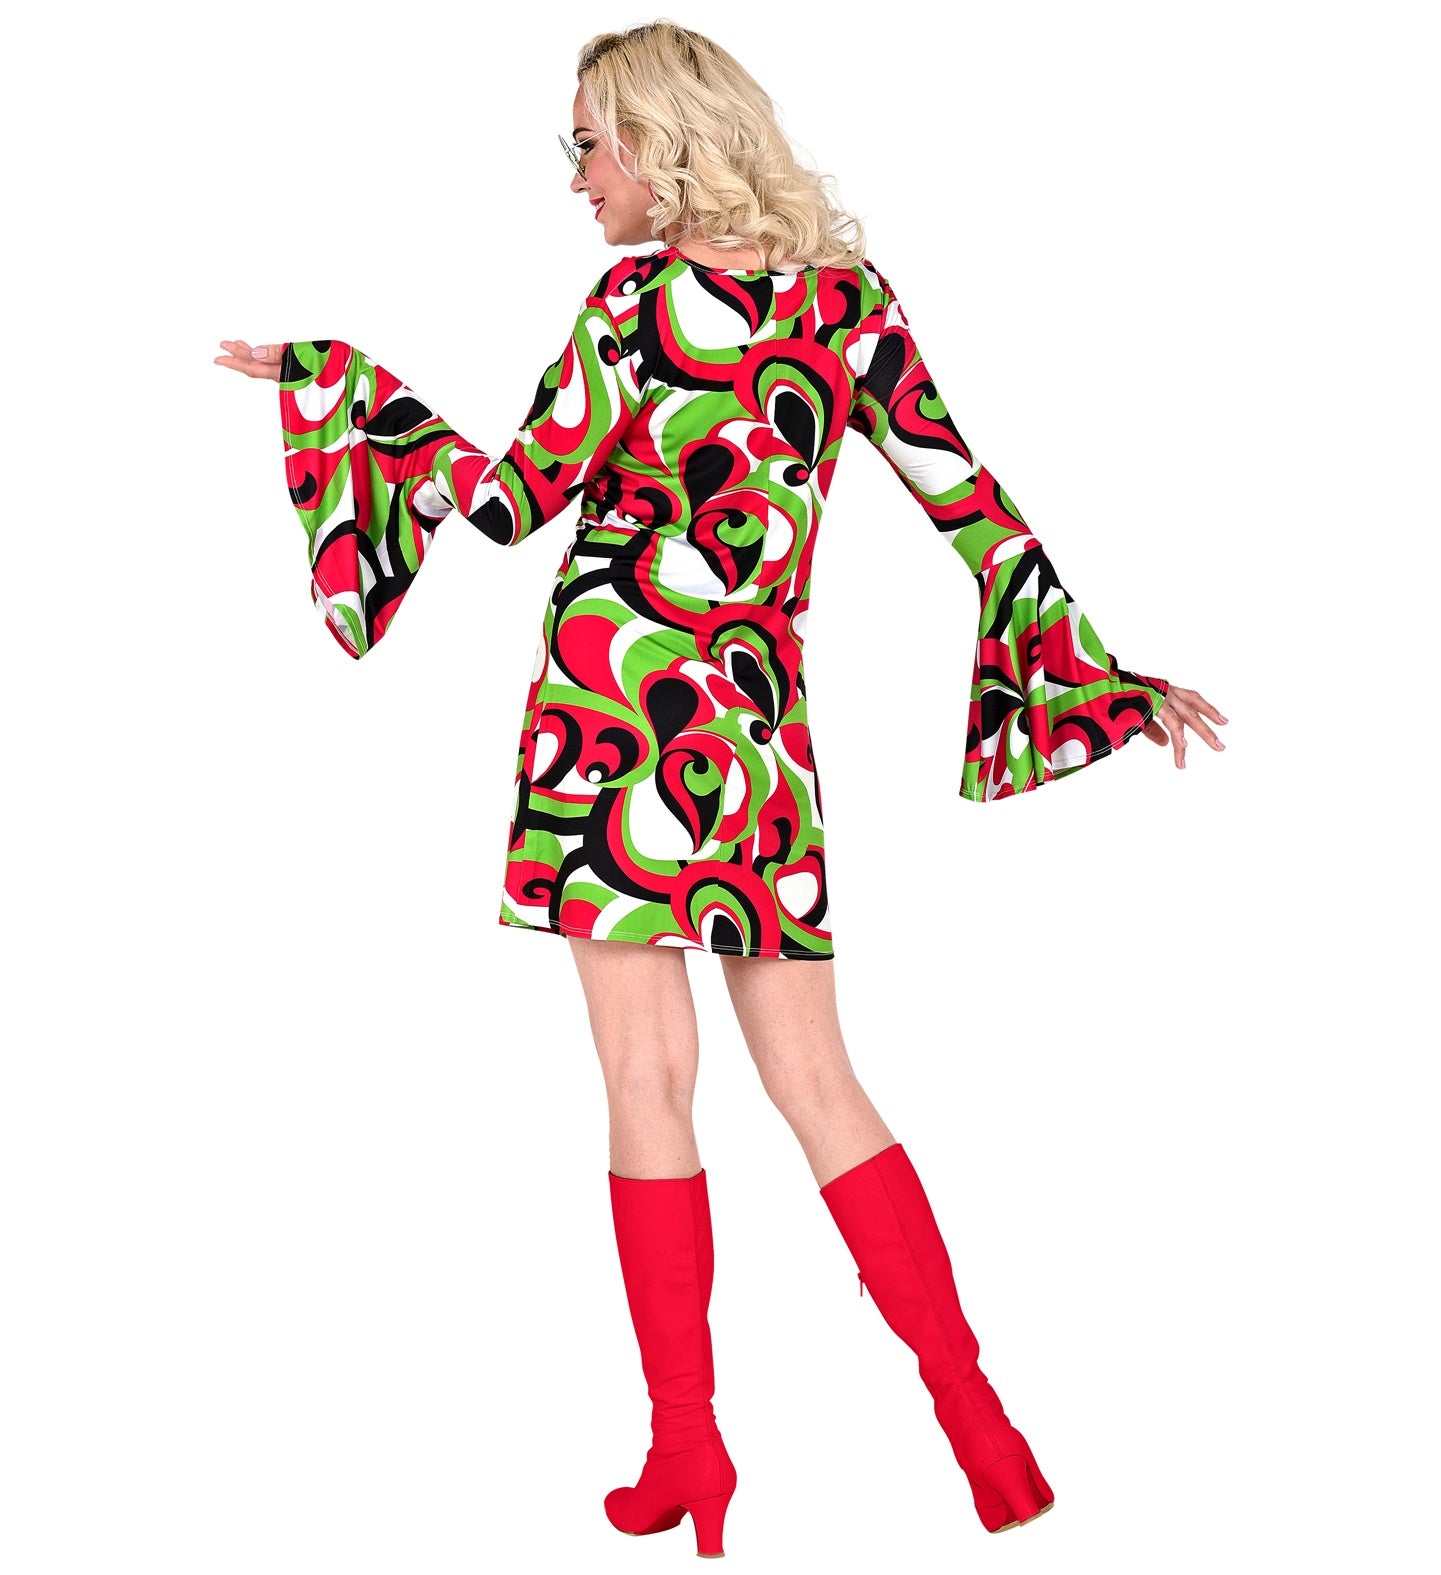 70's Psychedelic Groovy Disco Costume rear